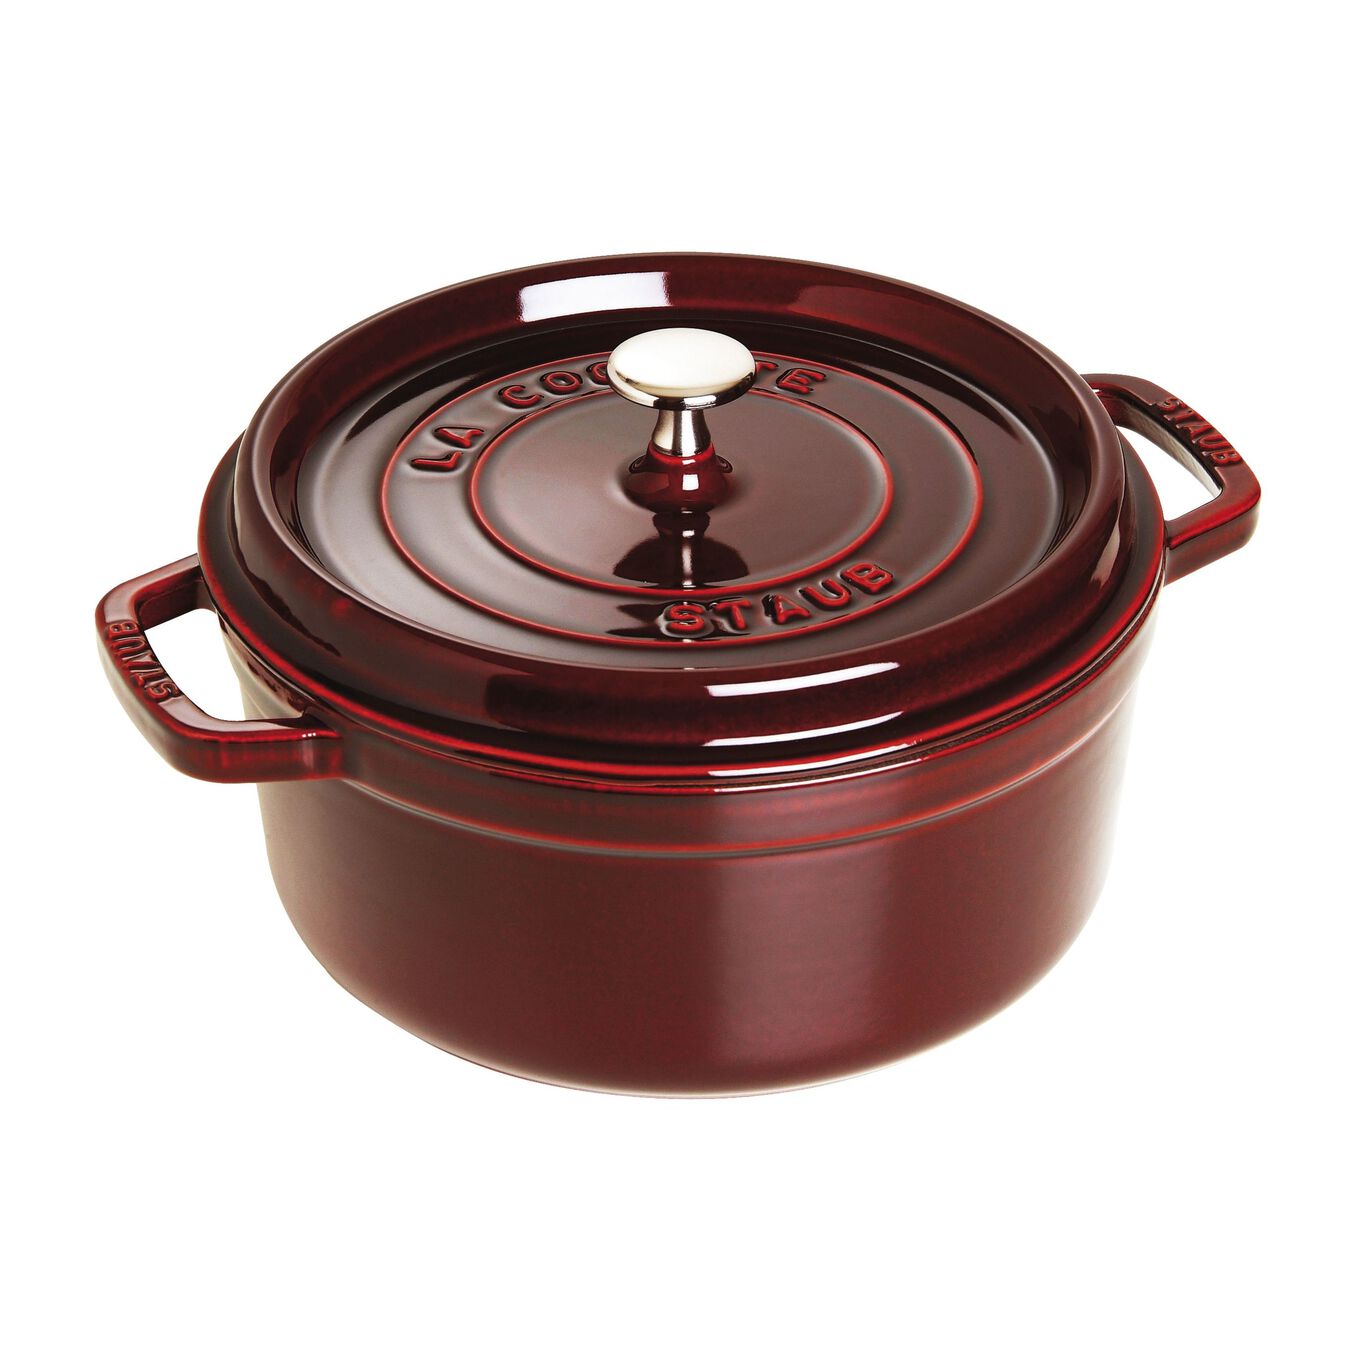 3.8 l cast iron round Cocotte, grenadine-red - Visual Imperfections,,large 1